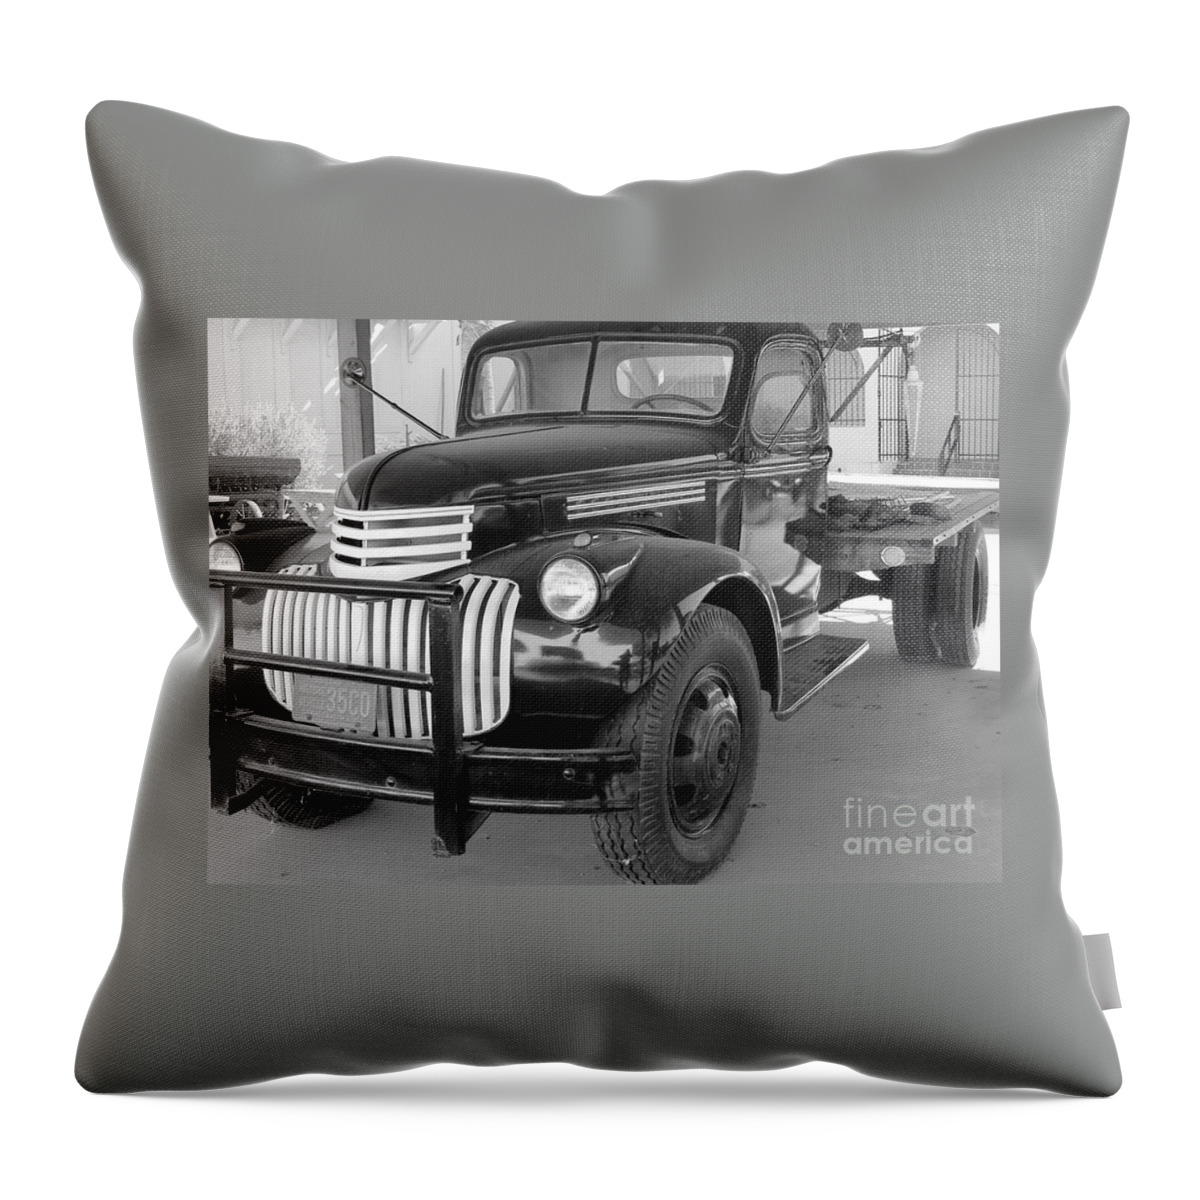 Chevy Throw Pillow featuring the photograph Chevrolet Farm Truck by Pamela Walrath